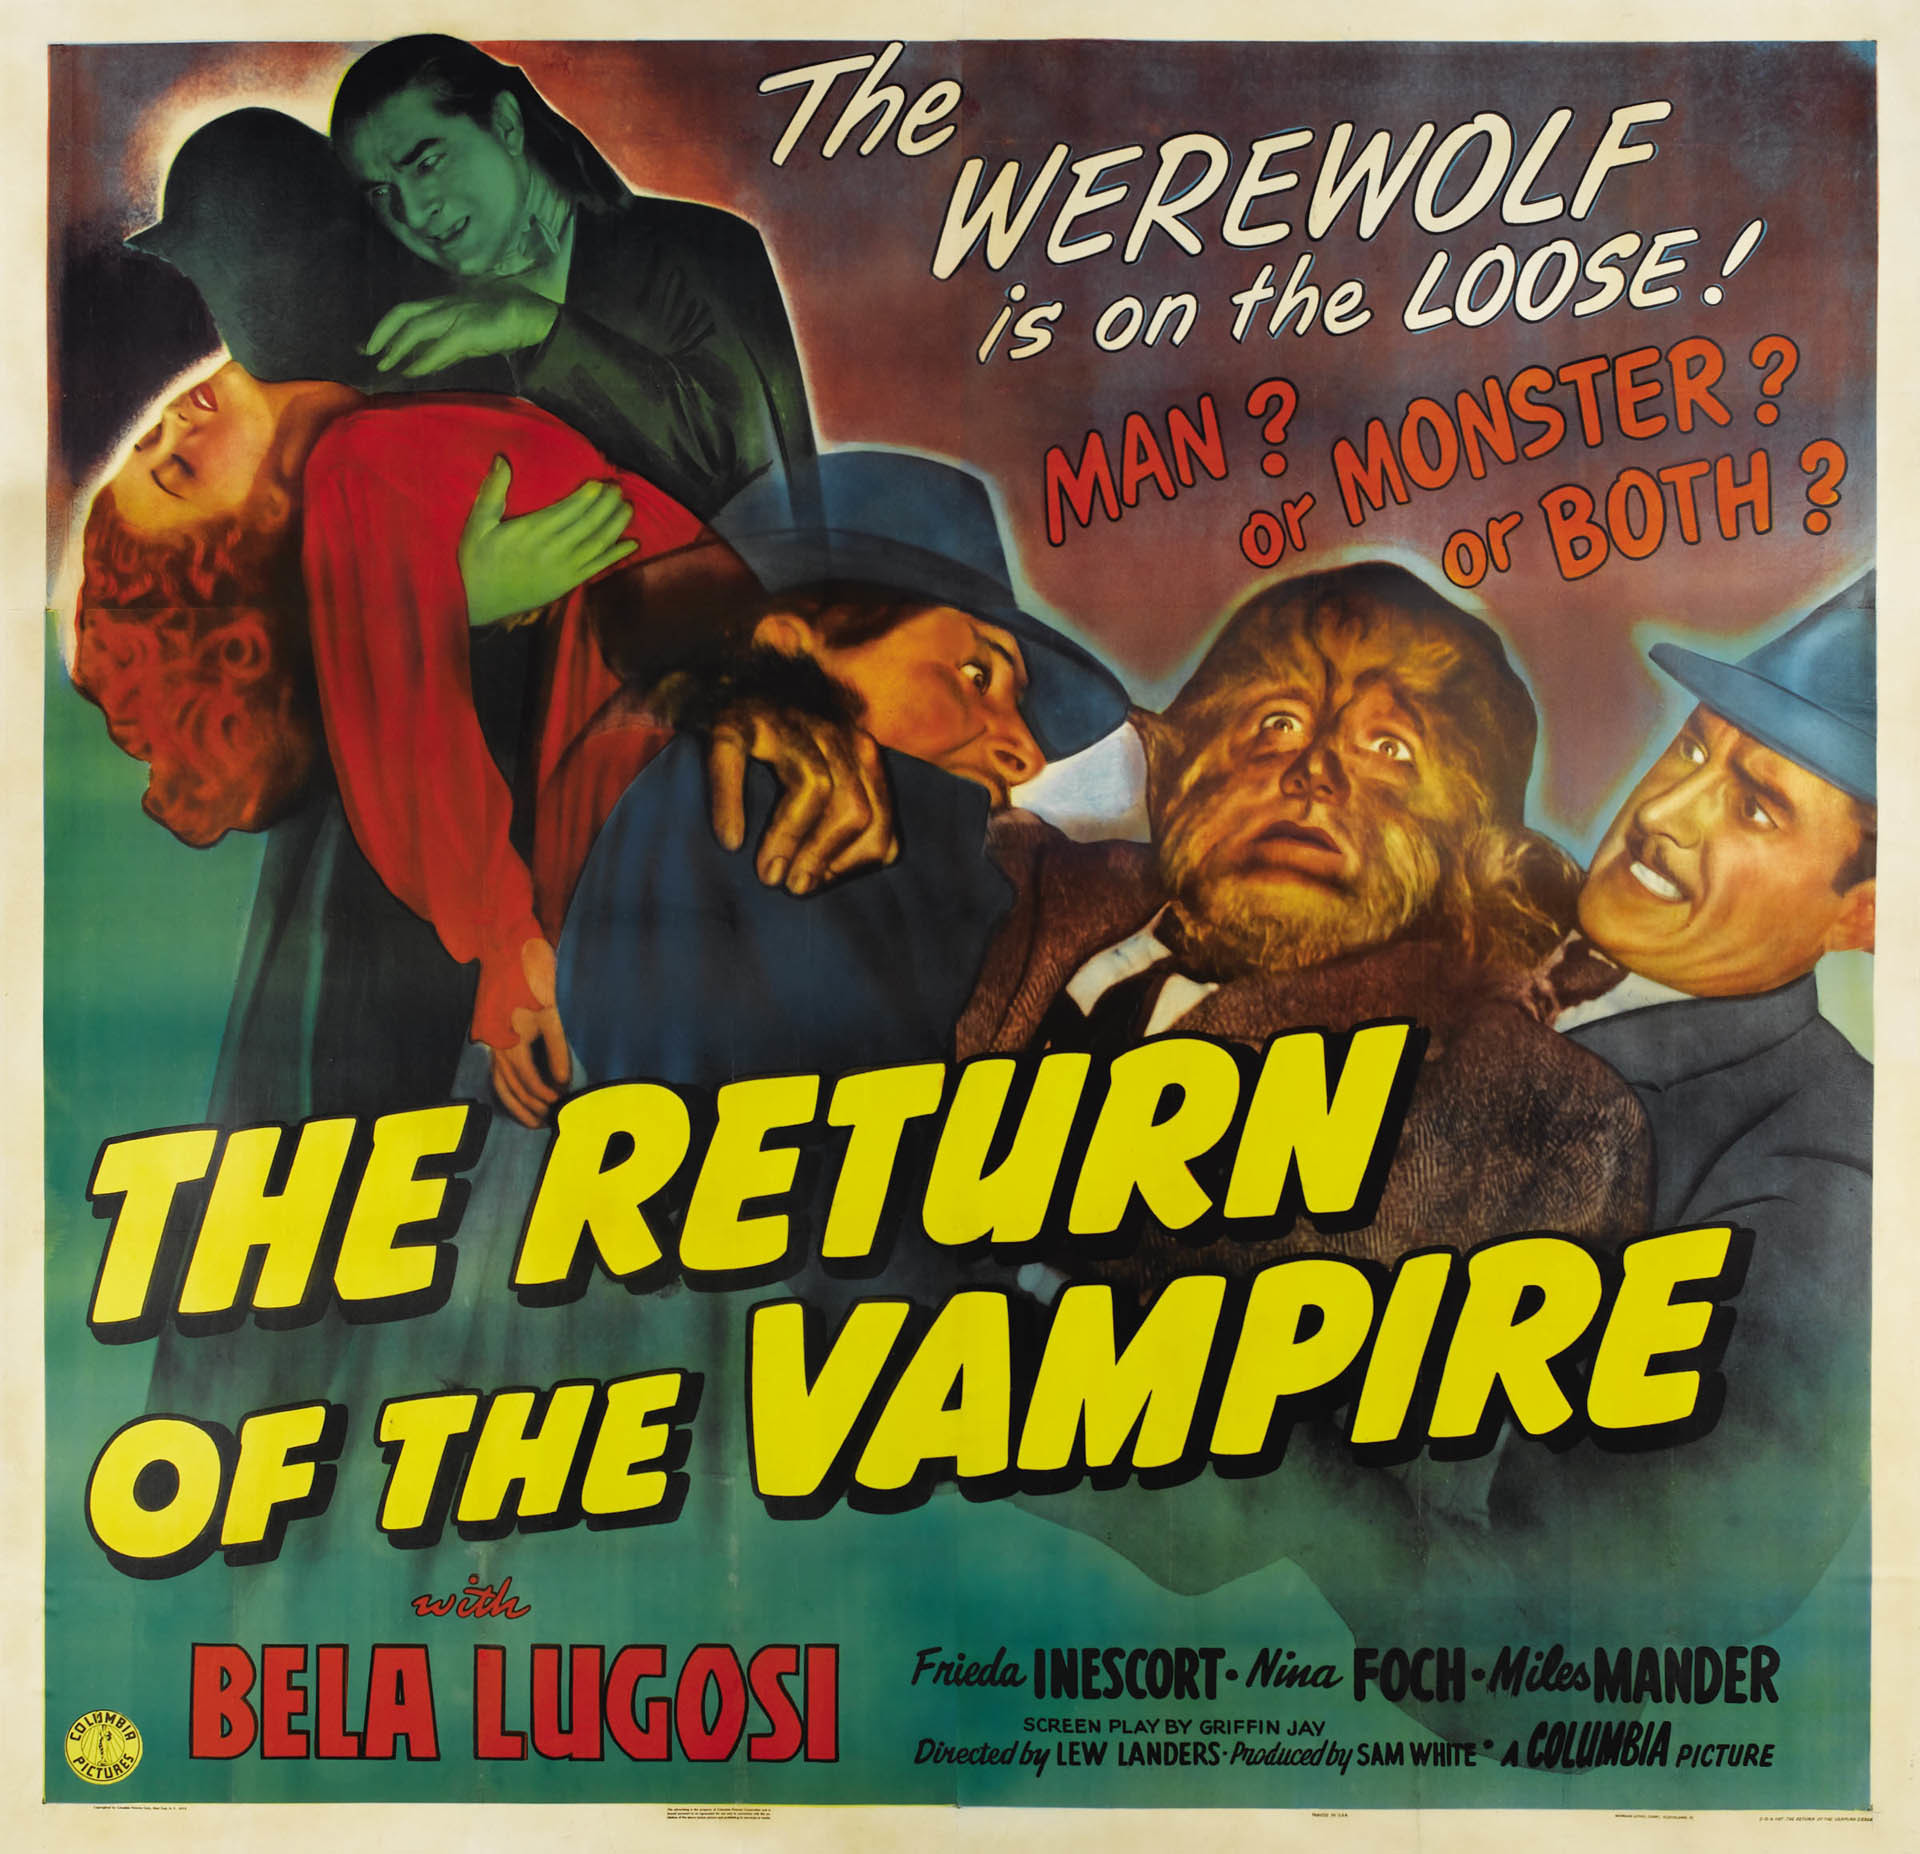 Free The Return Of The Vampire 1944 – Vintage Movie Posters Desktop Wallpaper and Computer Background